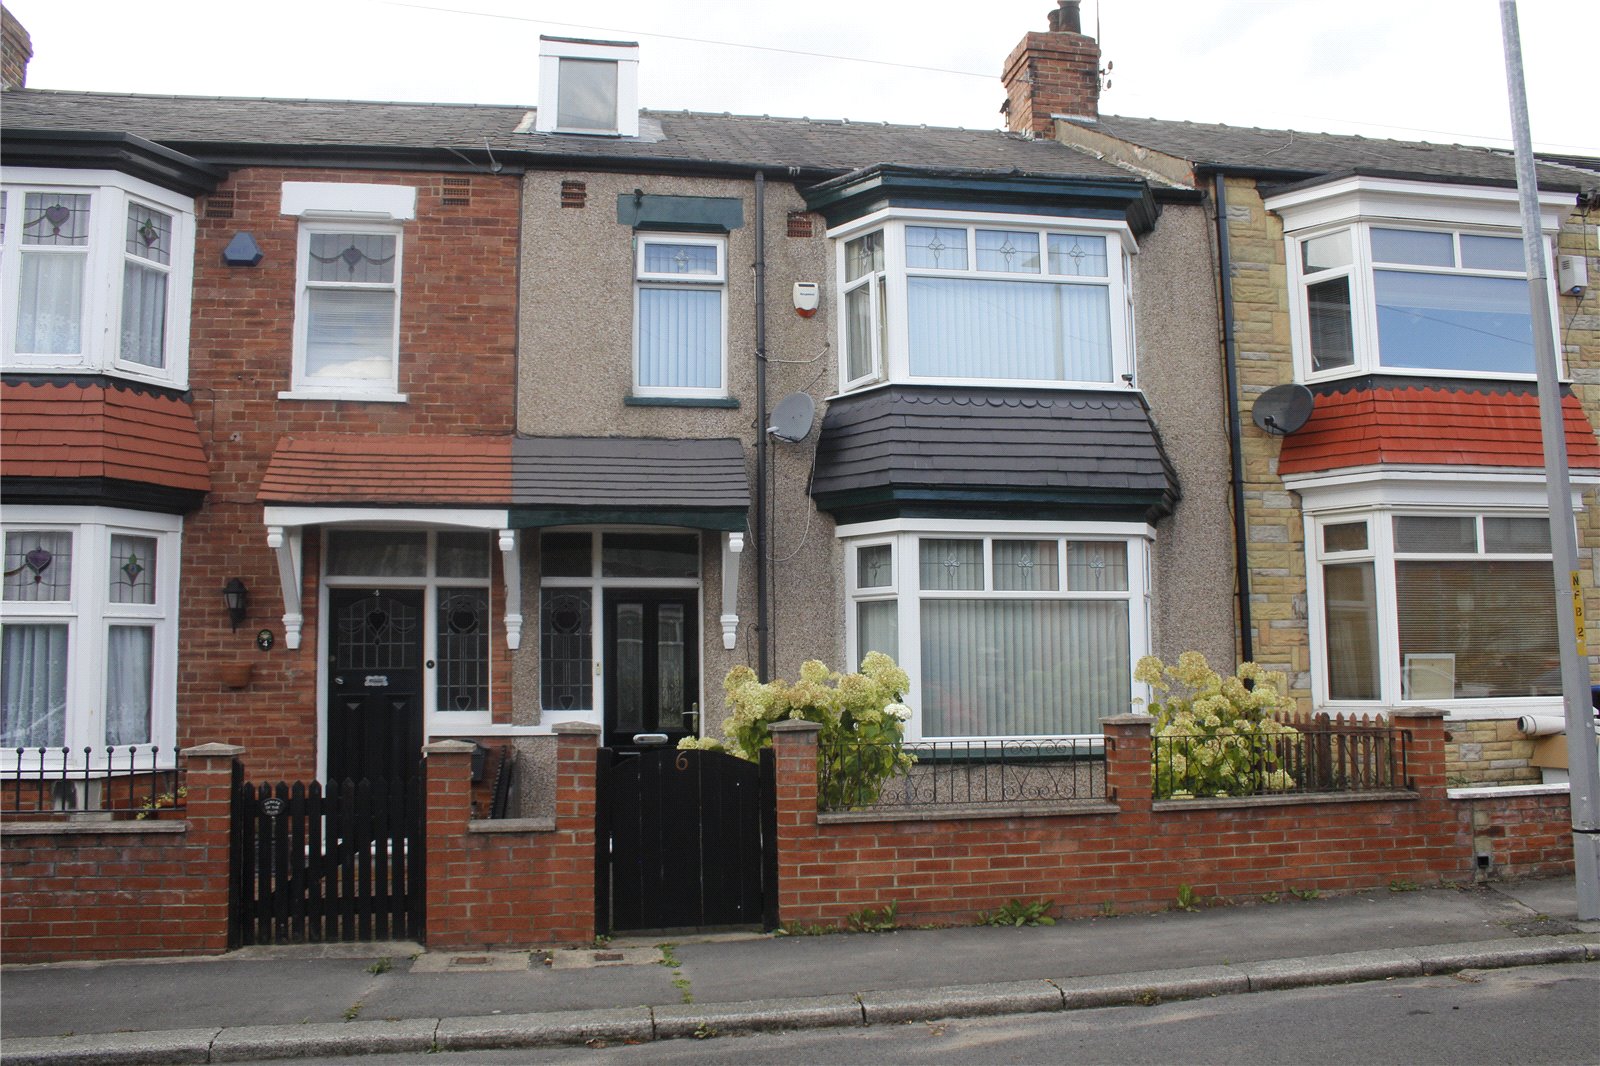 2 bed house for sale in Aysgarth Road, Linthorpe - Property Image 1